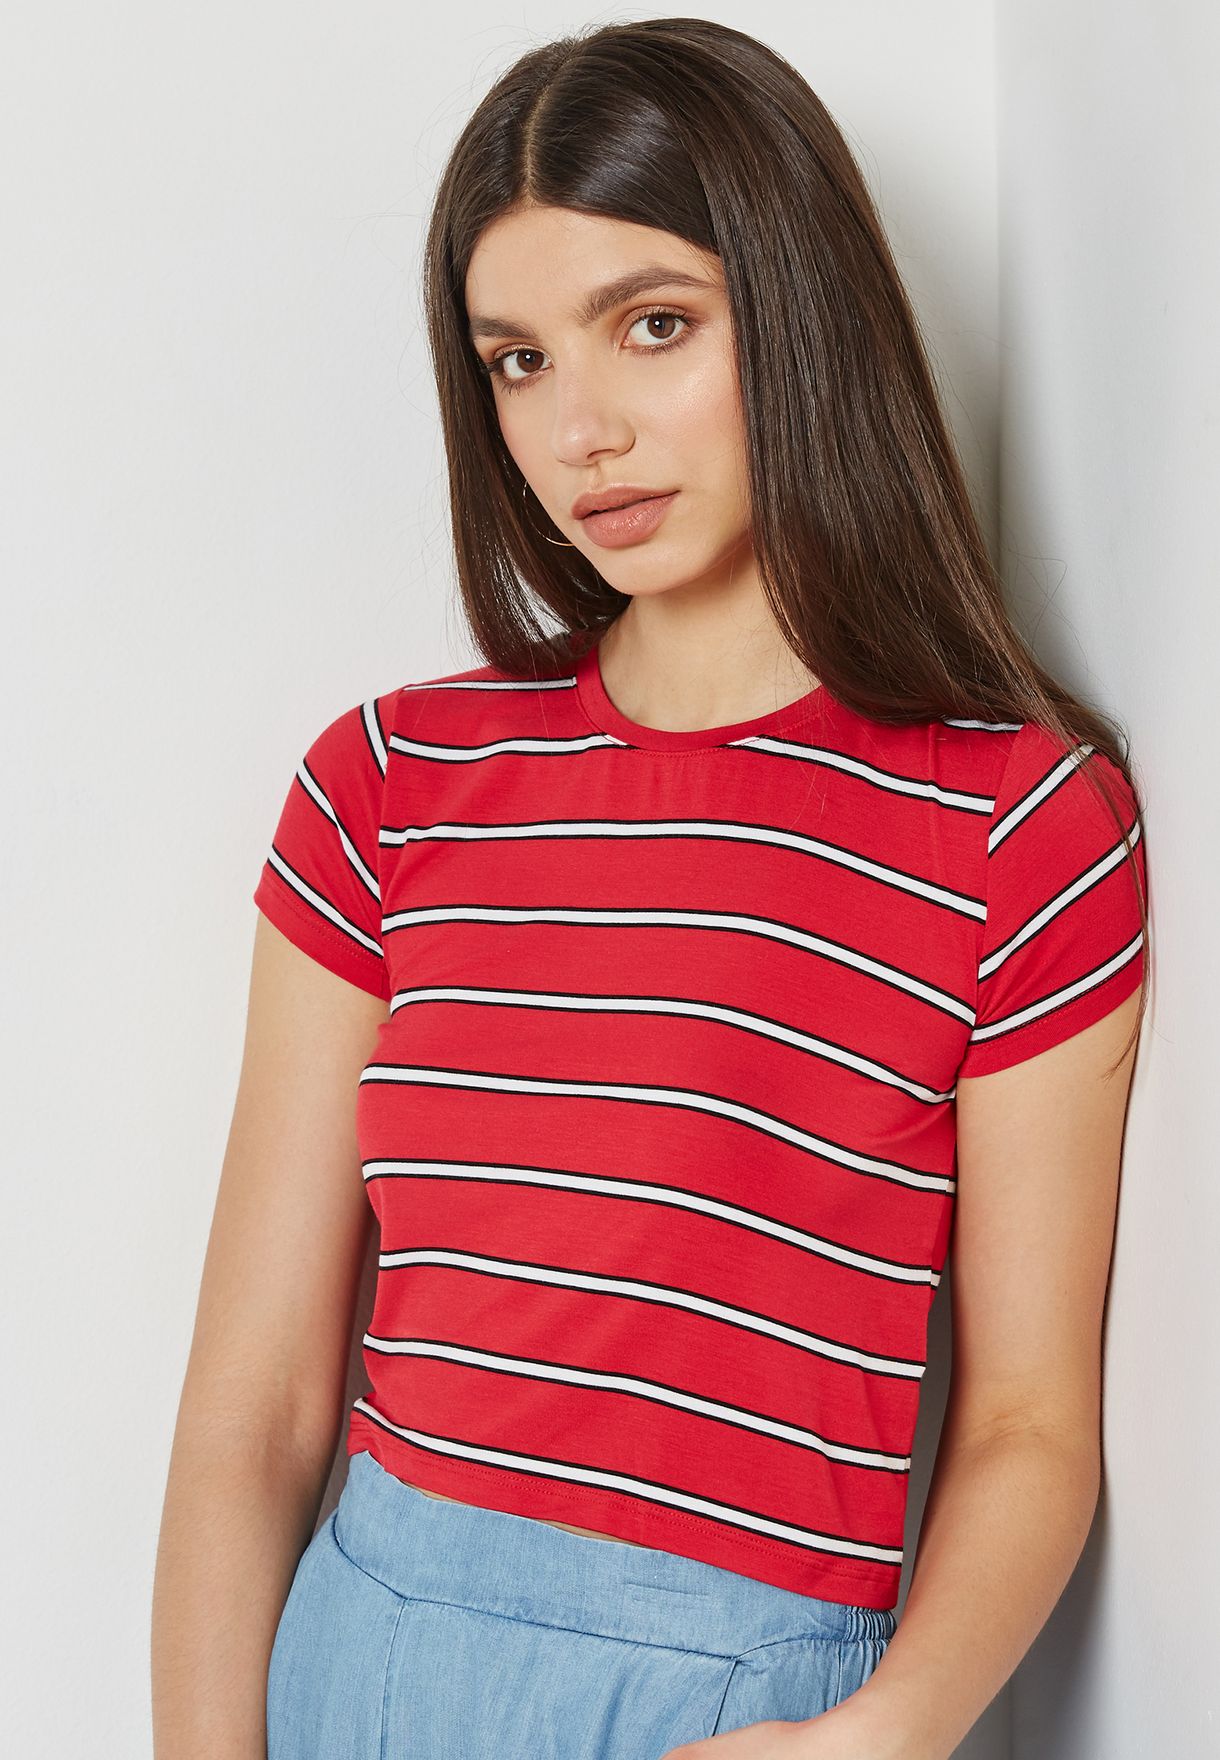 cotton on red shirt